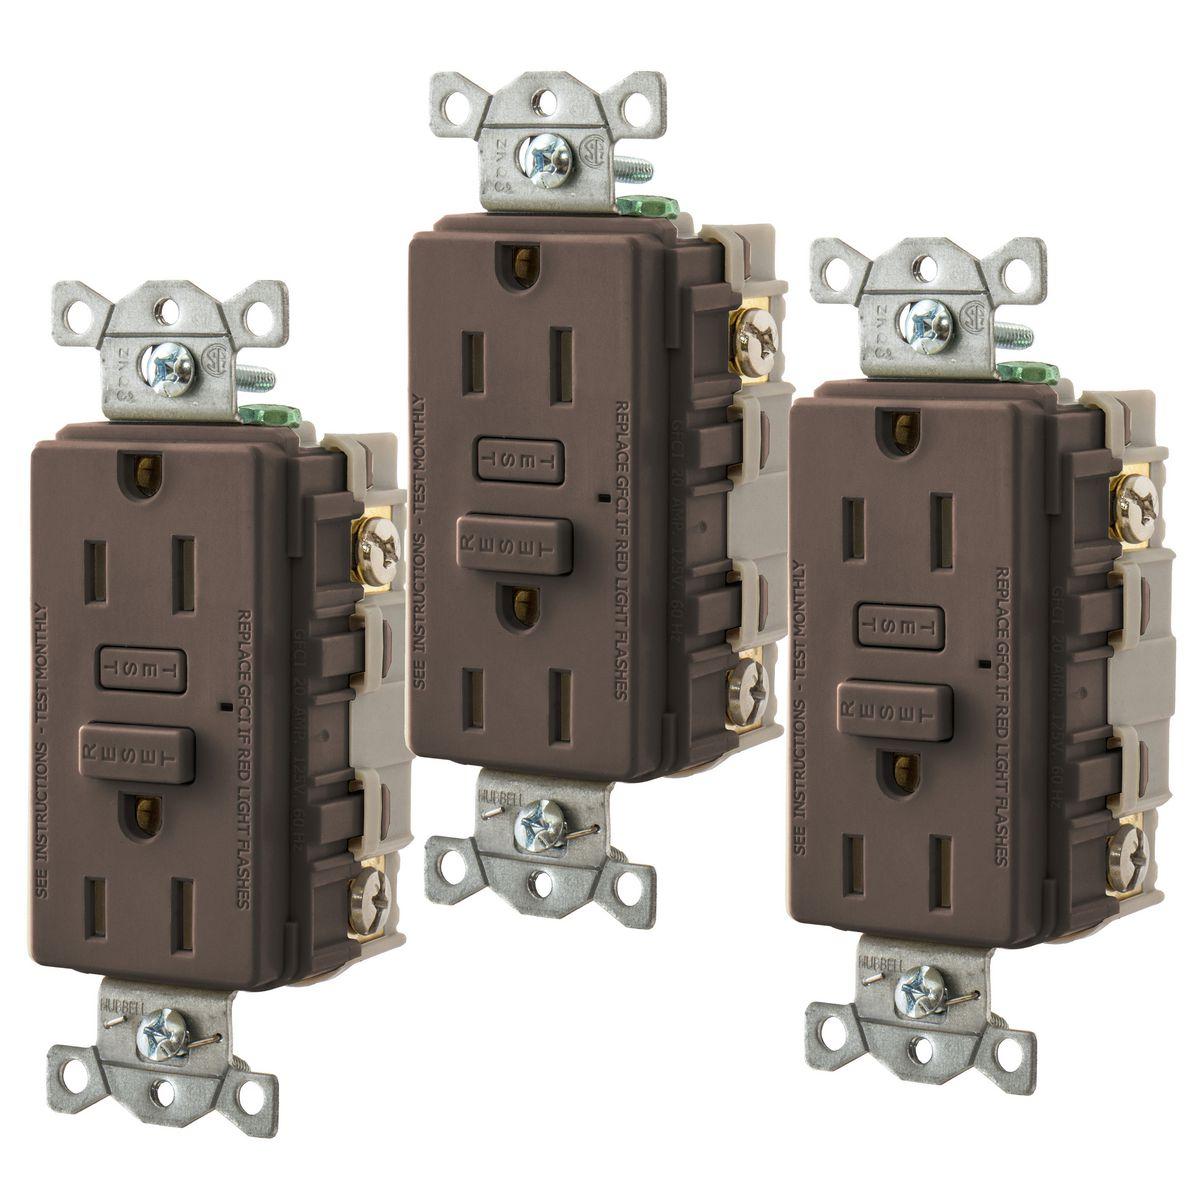 Hubbell GF1533 HUBBELLPRO, GFCI, 15A, 3 Pack, Brown. 